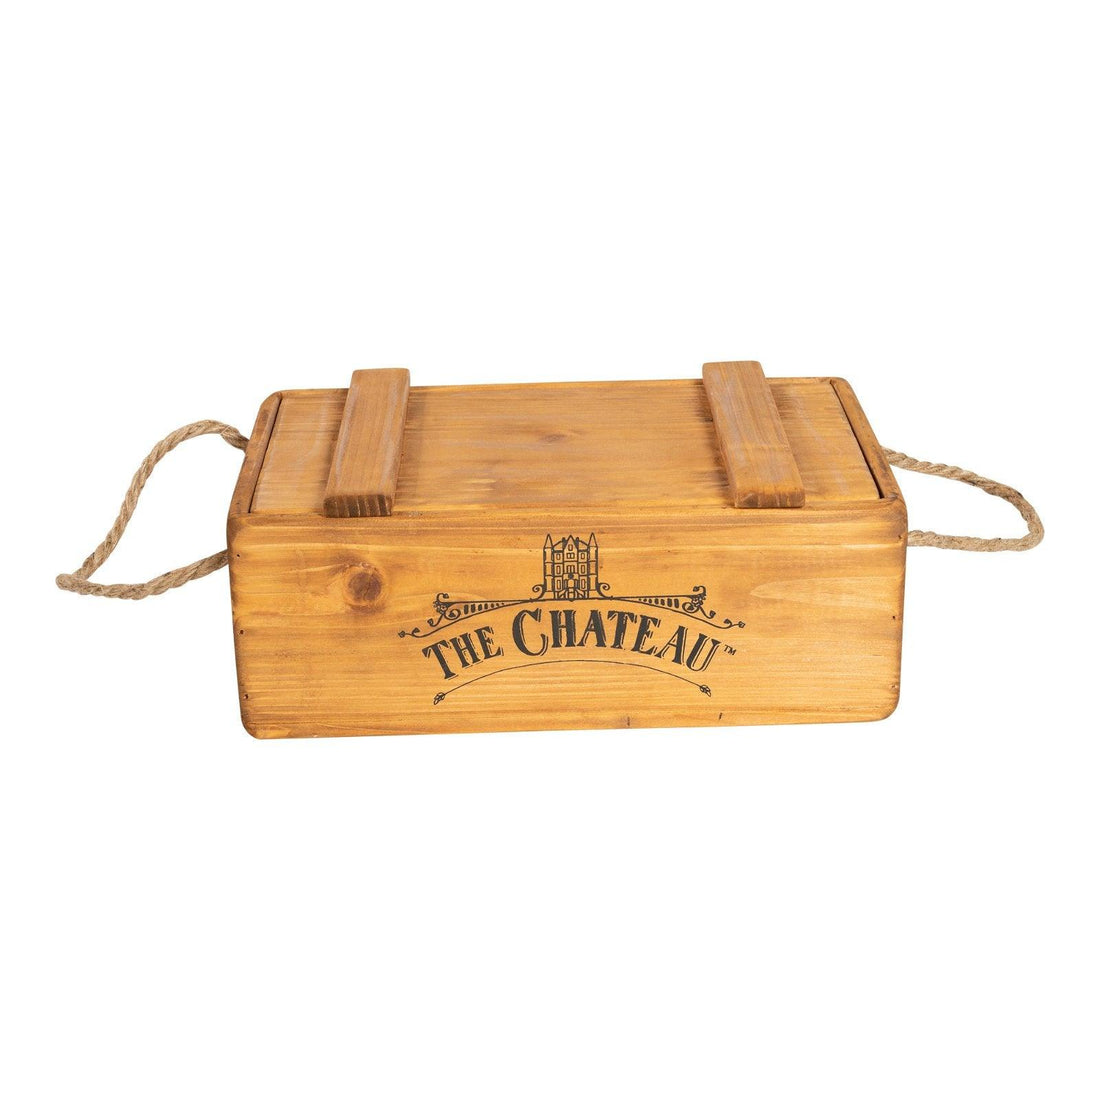 Set Of 3 The Chateau Rustic Vintage Crates - £203.99 - Storage Units 